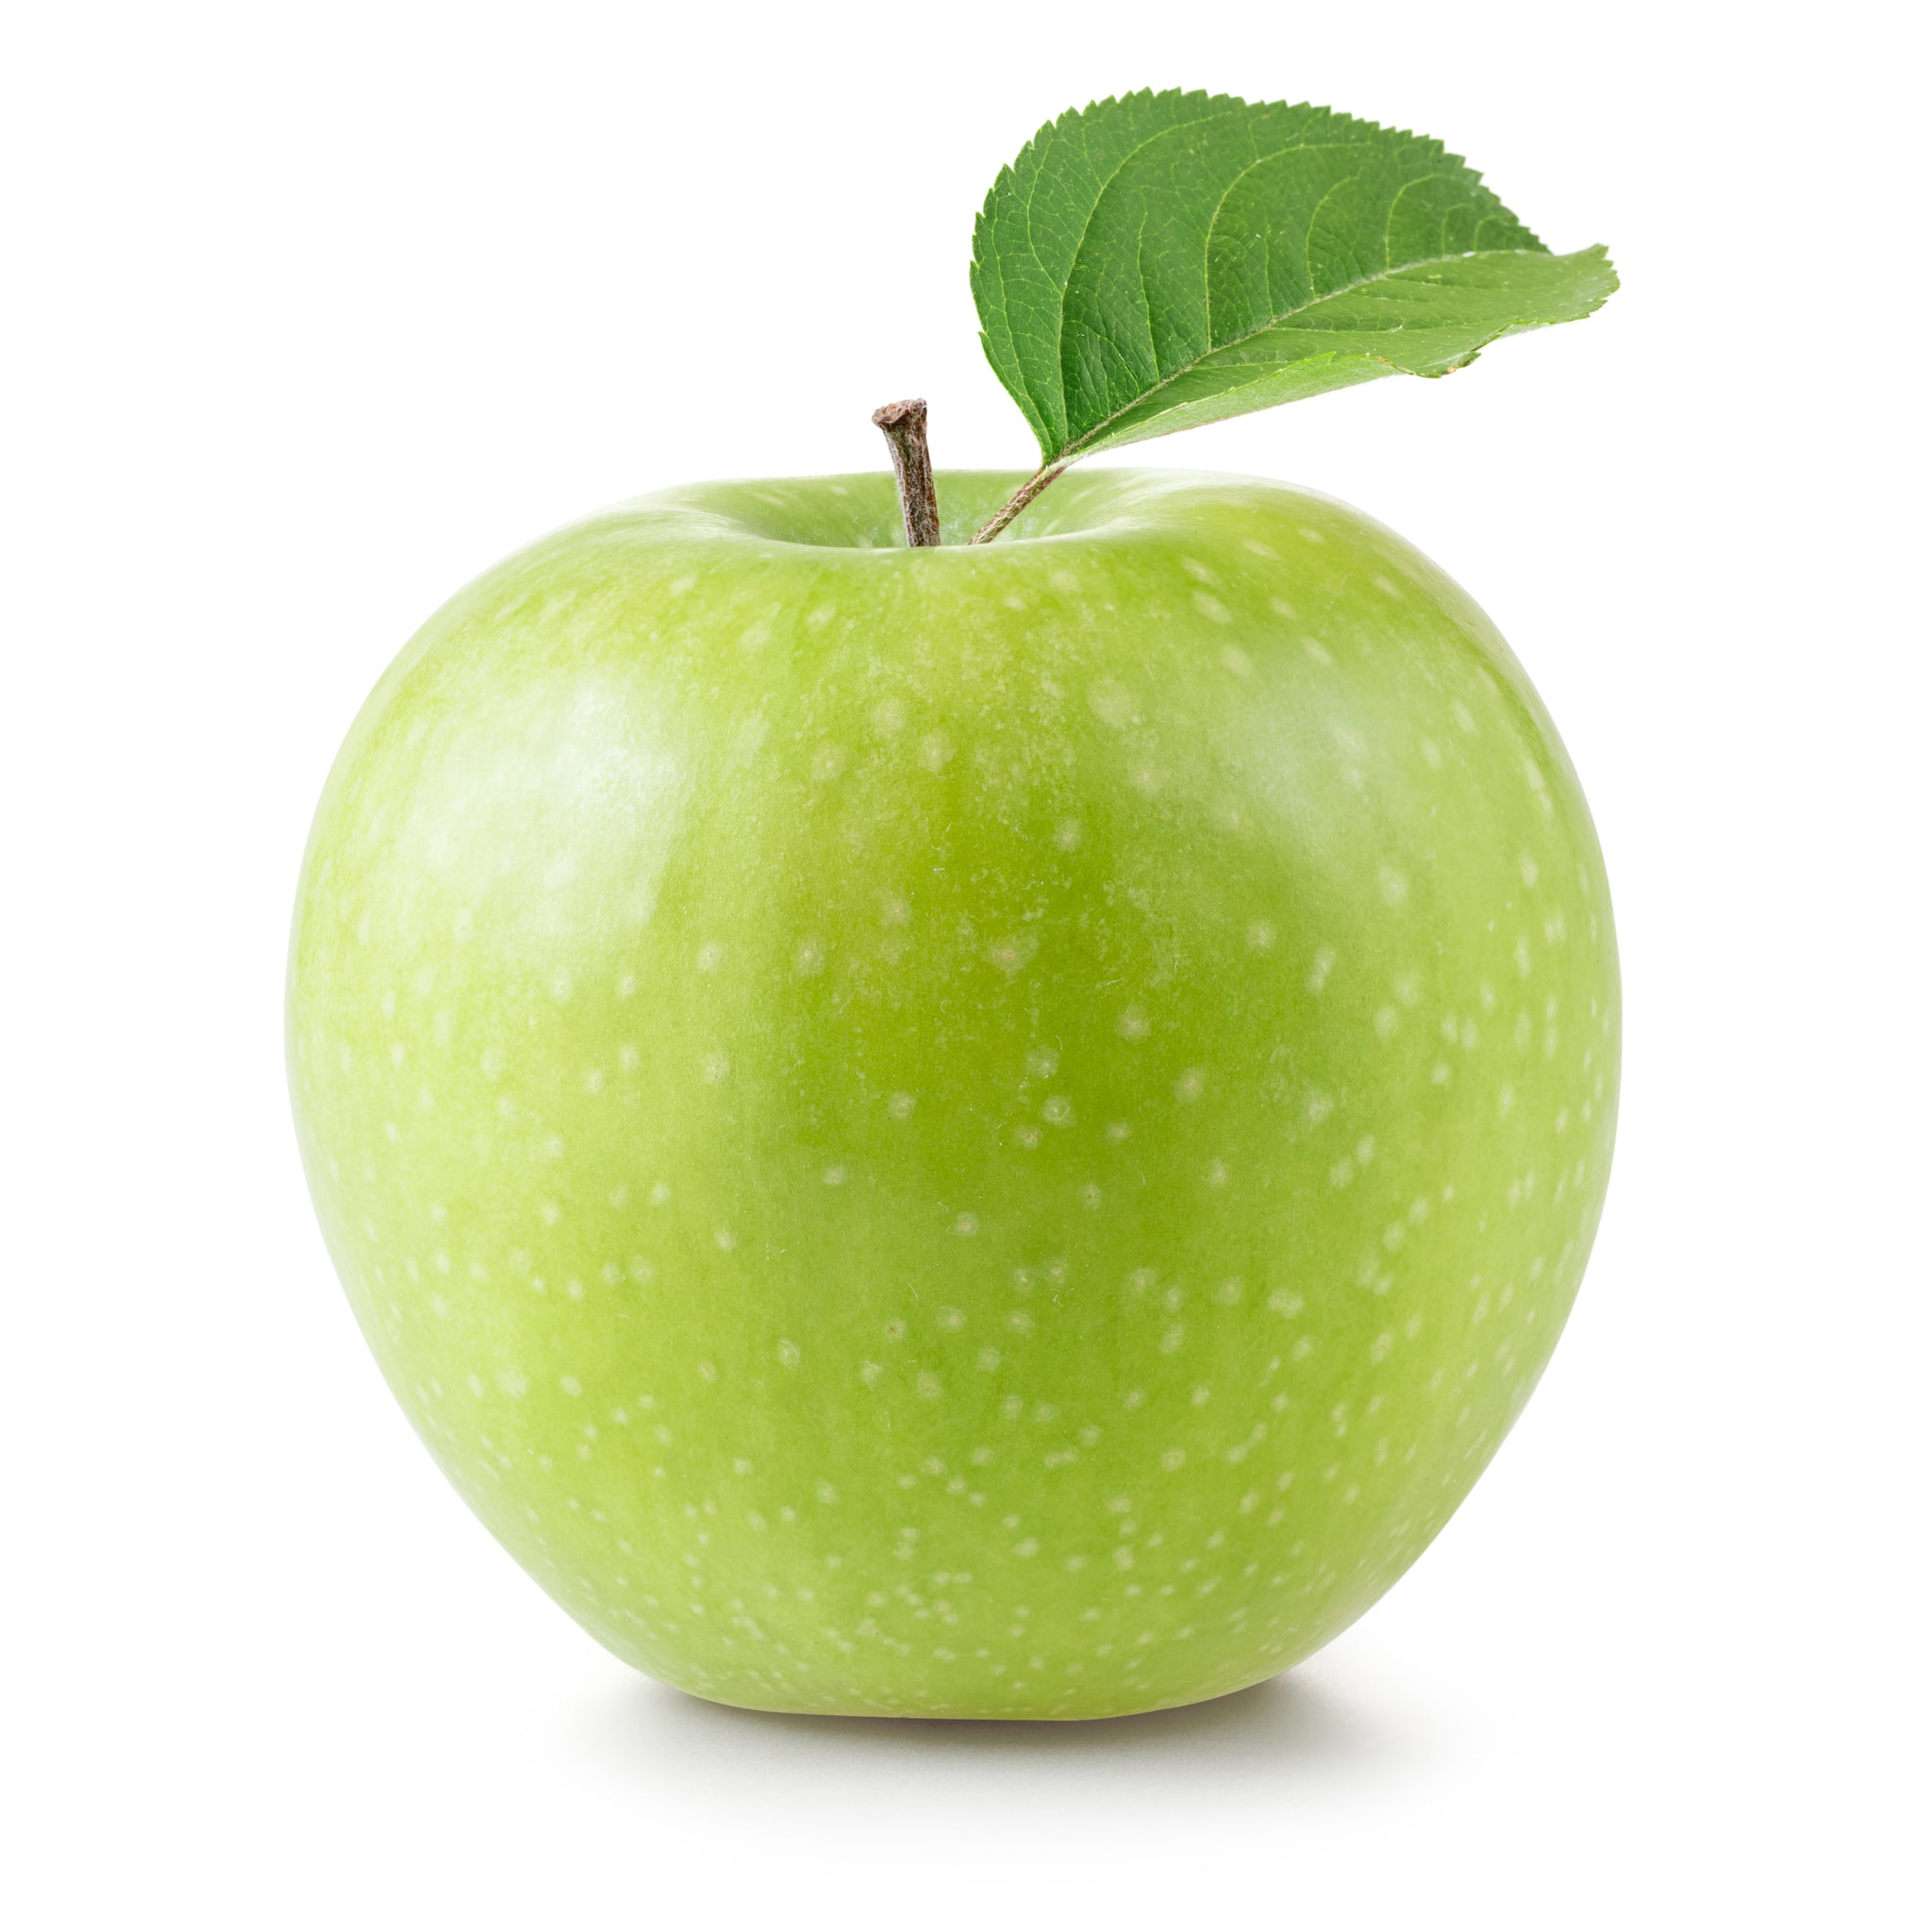 bah>Apples Granny Smith, one